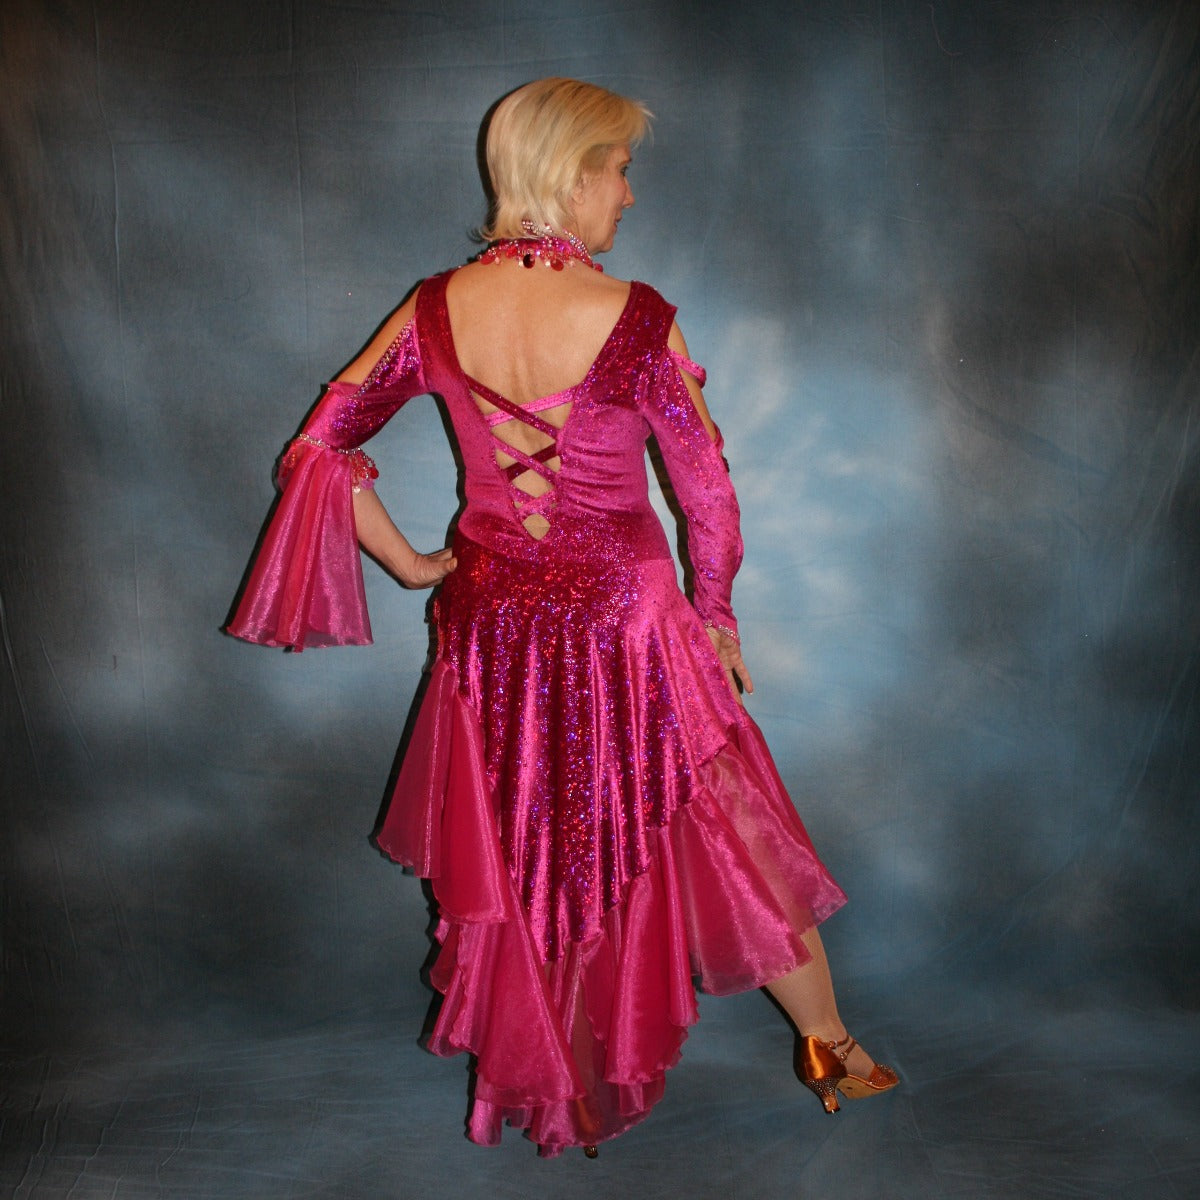  back view of Crystal's Creations Fuchsia Latin/rhythm dress created of fuchsia glitter stretch velvet with fuchsia organza flounces, lattice detail strap work on one long sleeve, embellished with detailed Swarovski rhinestone work, along with hand beading & spangles on sale! A matching neckpiece is included.